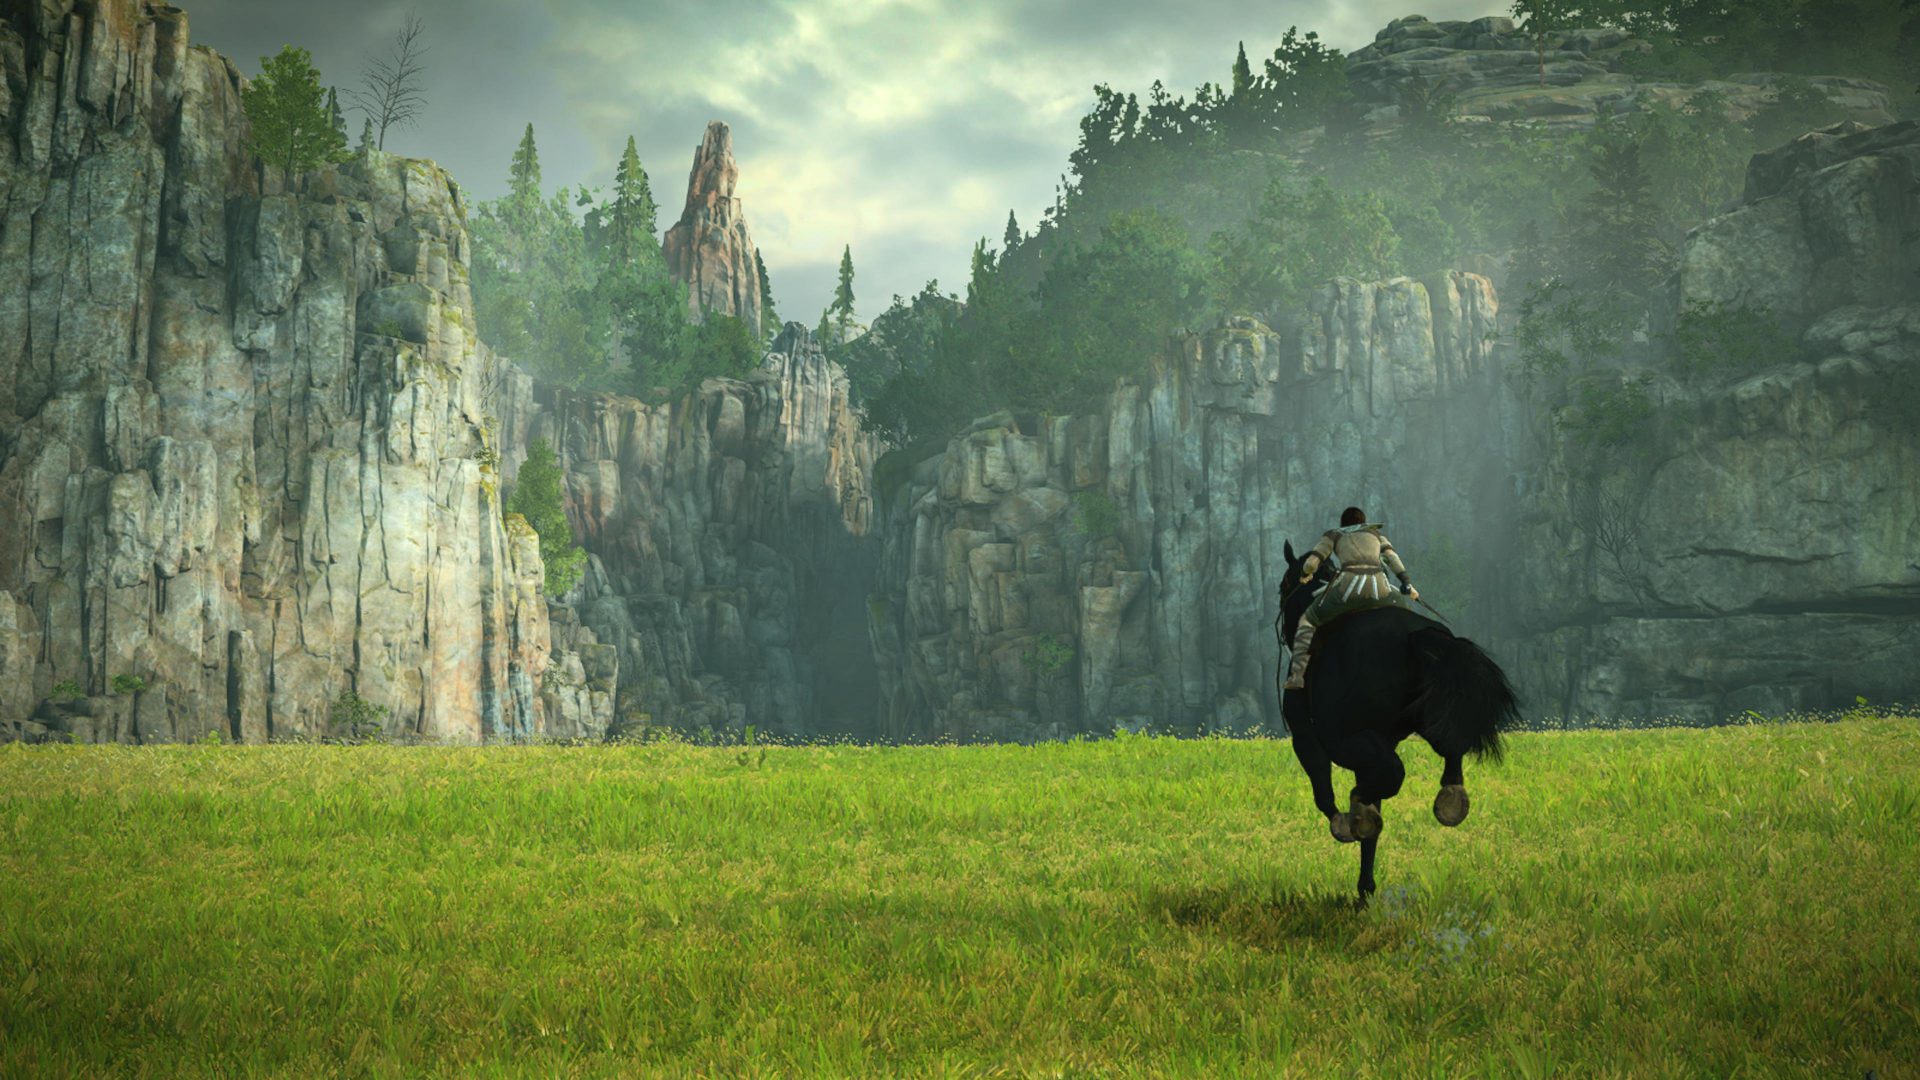 Shadow Of The Colossus Game Download For PC Highly Compressed Free